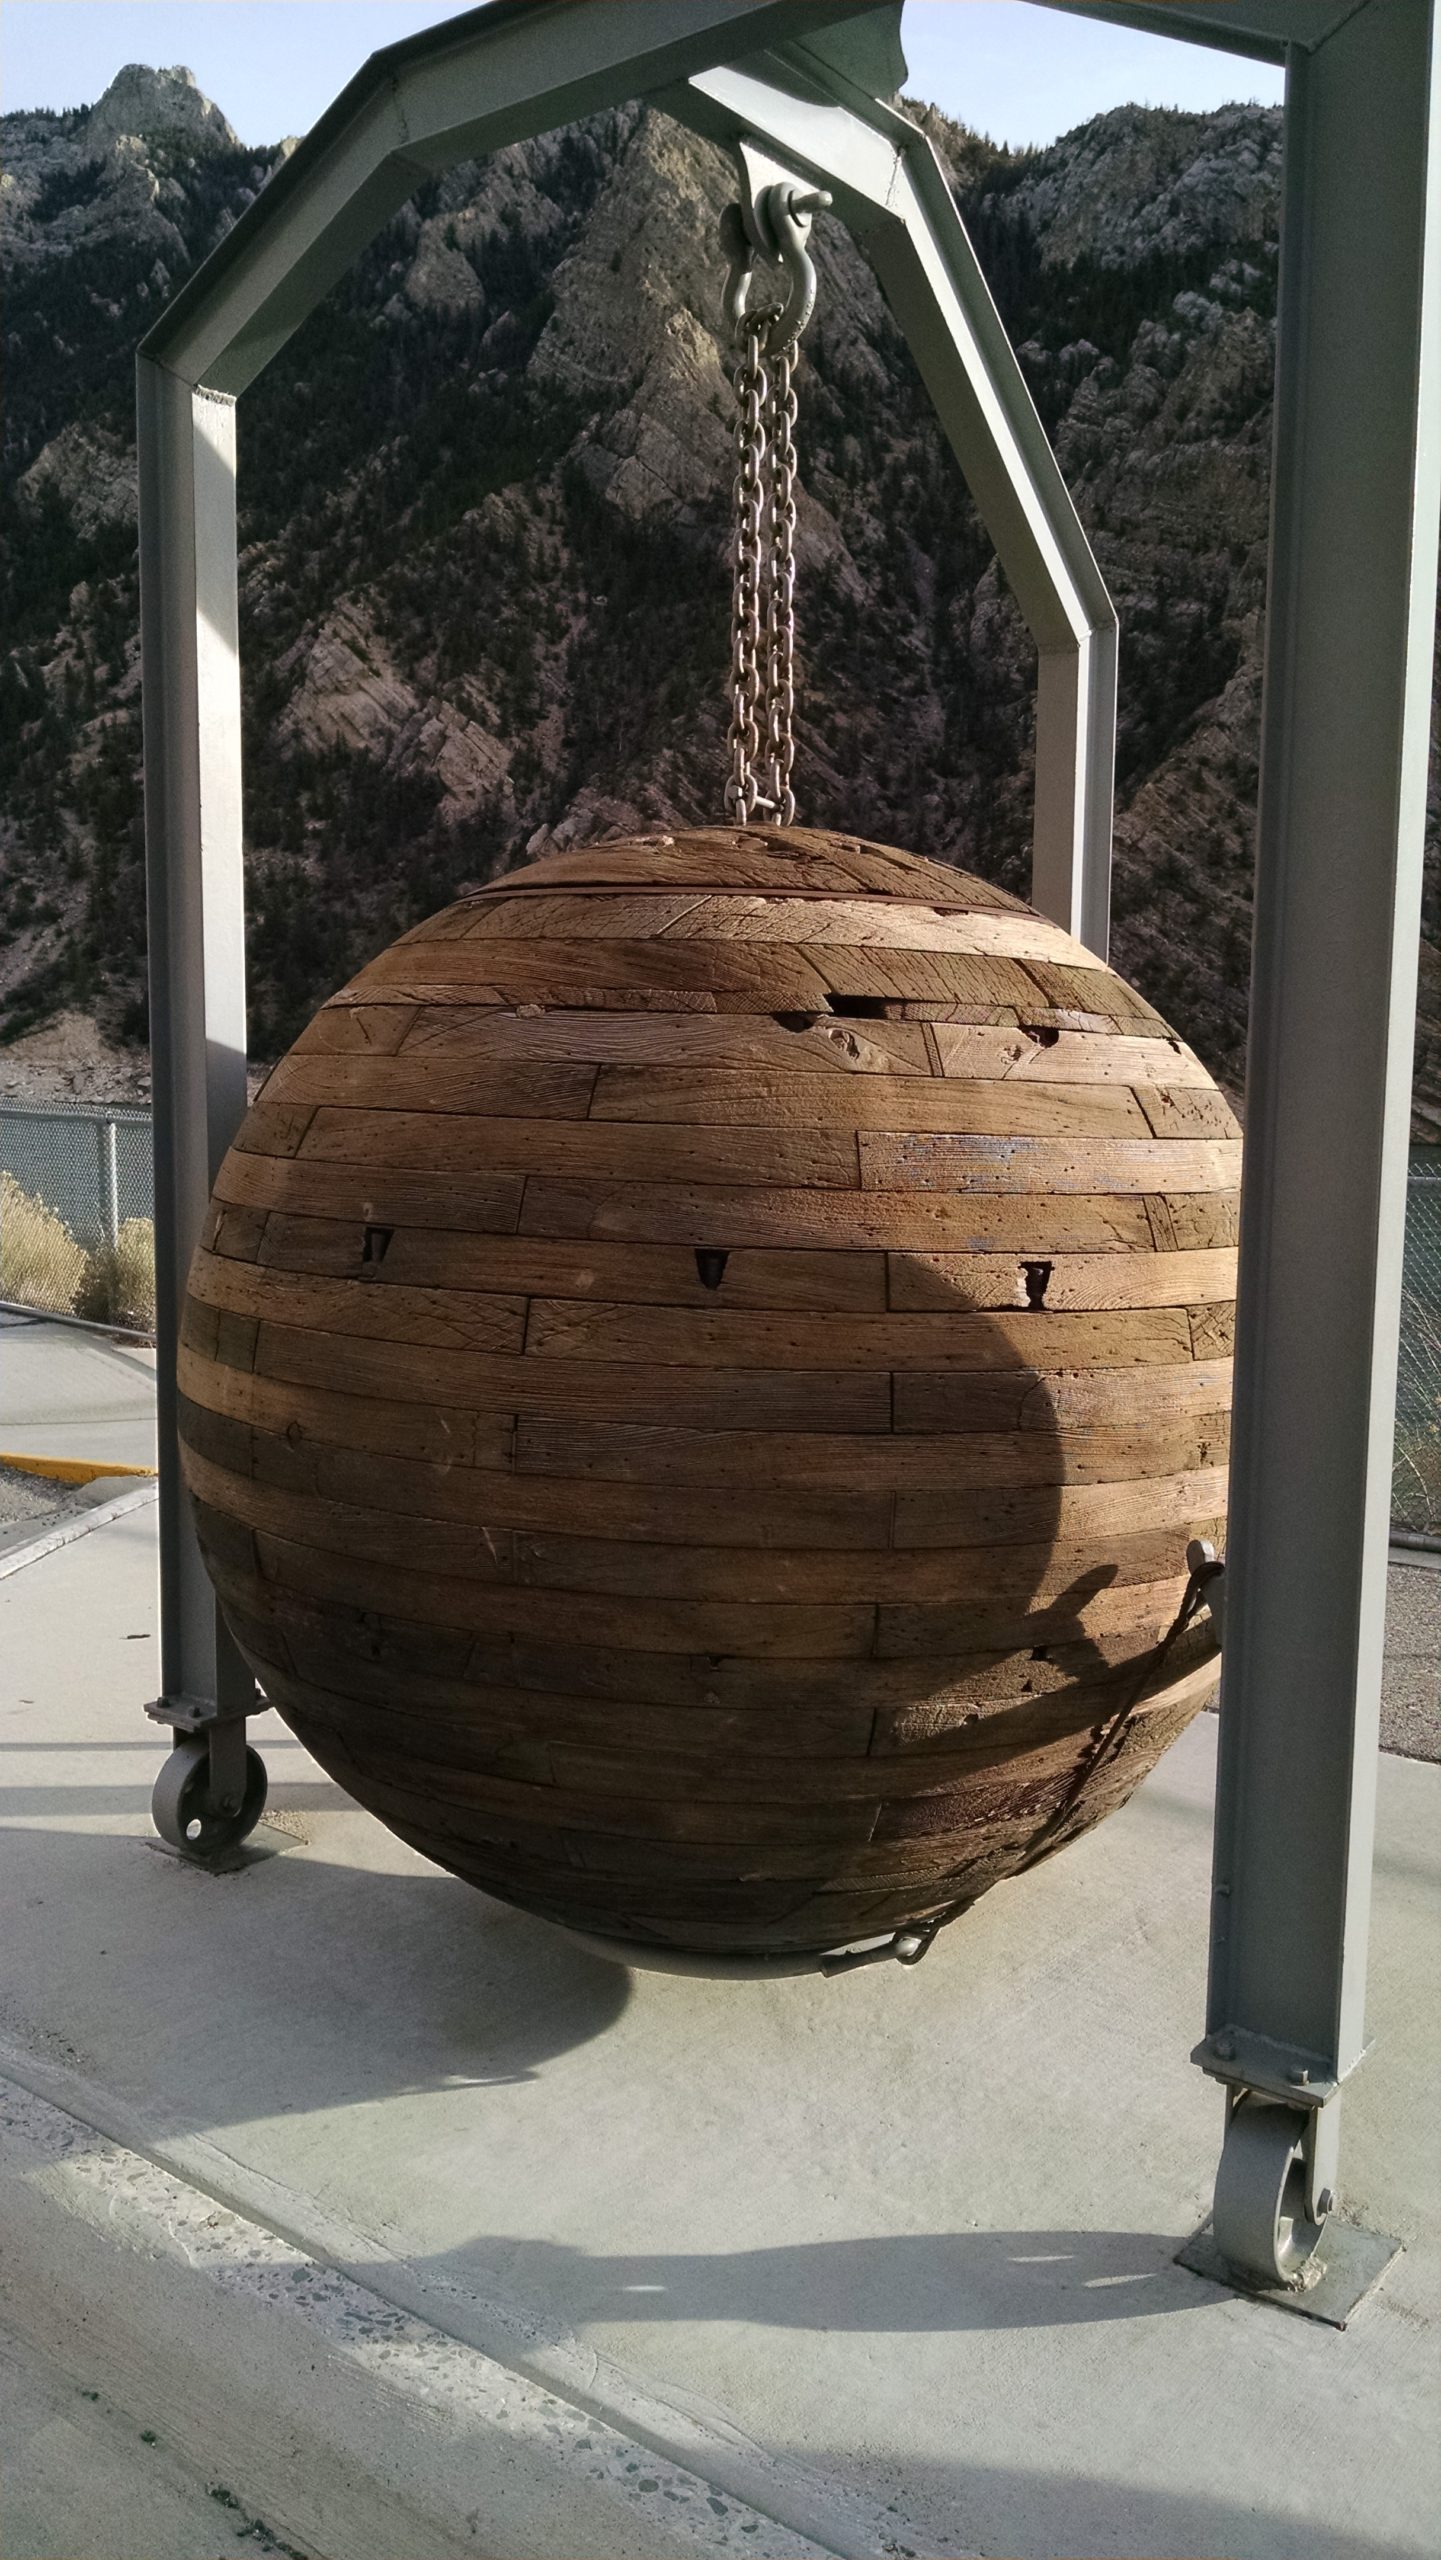 This is an old wooden ball plug that was historically used to plug the 42" outlet hole in the dam.